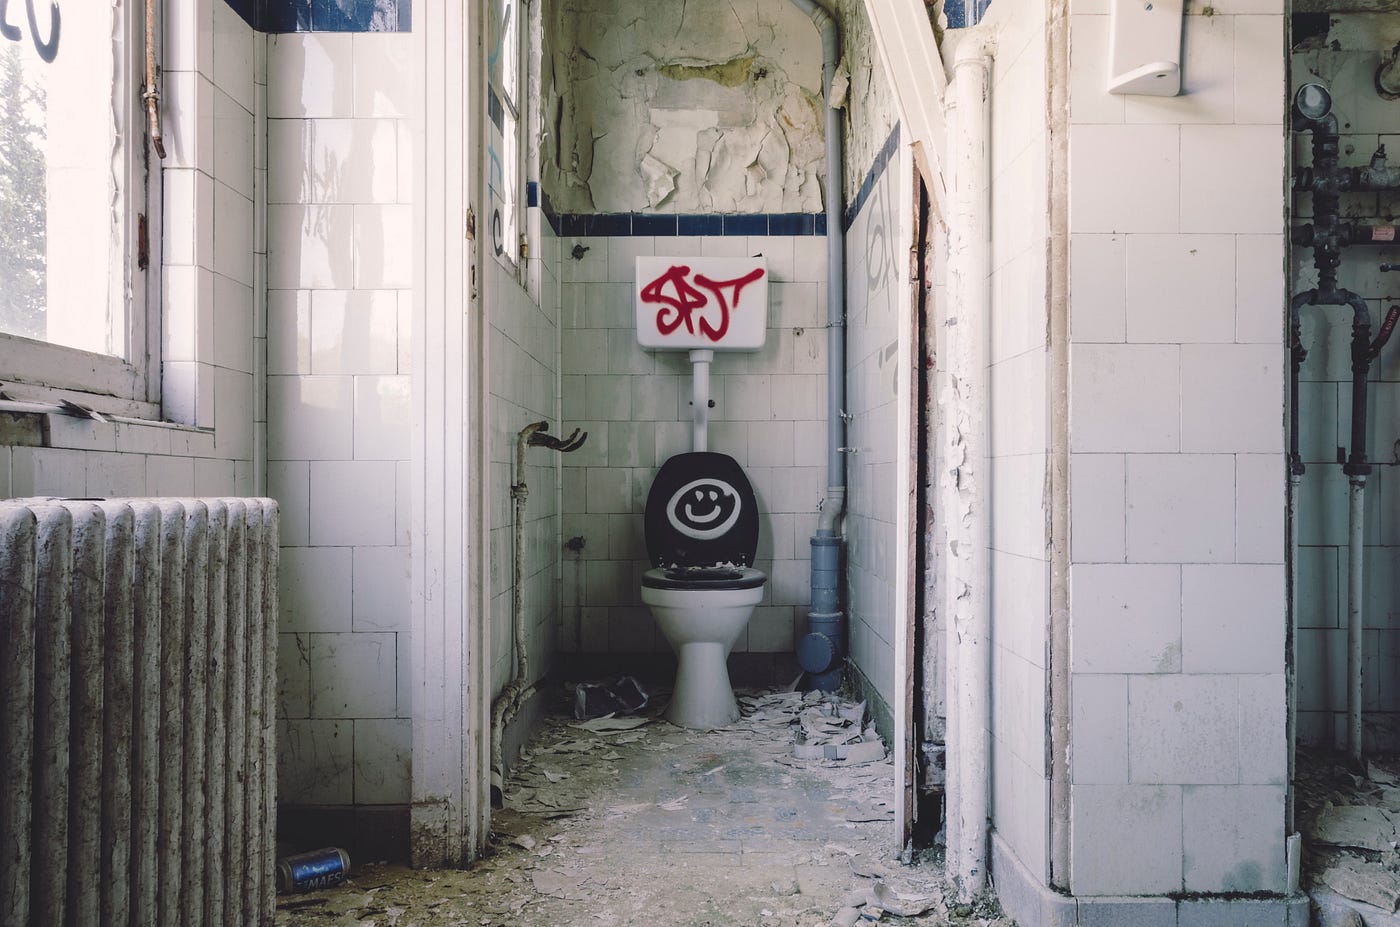 The Terror in the Toilet Whats Up With Bathroom Ghosts, and Why Are They Watching OUR Unfinished Business? by Cat Baklarz Writers Blokke Medium image